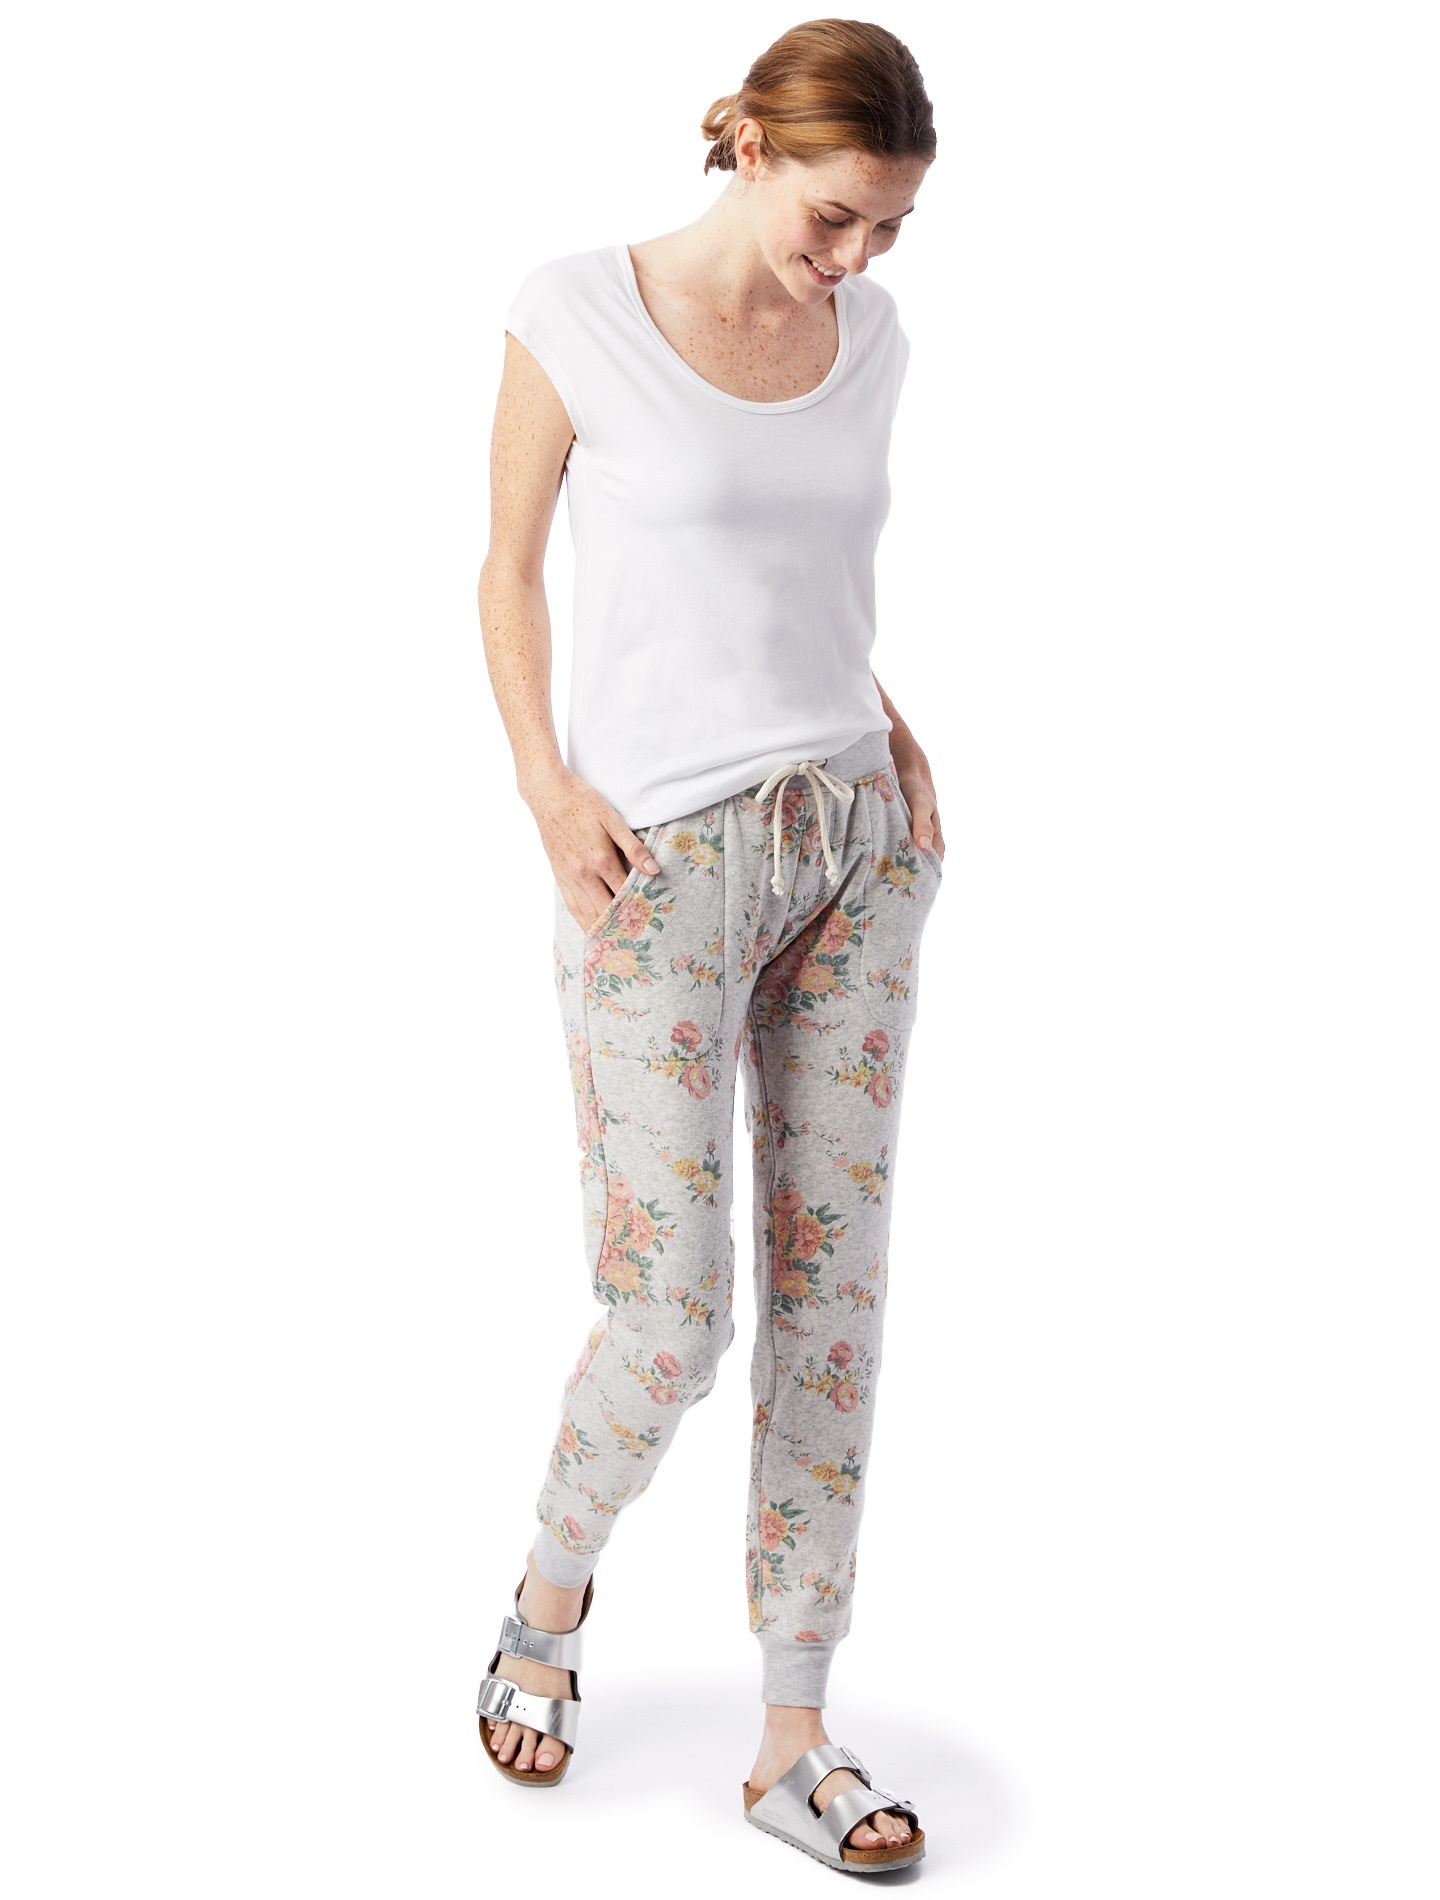 Printed Eco-Fleece Jogger Pants in Eco Light Grey Country Floral (2).jpg